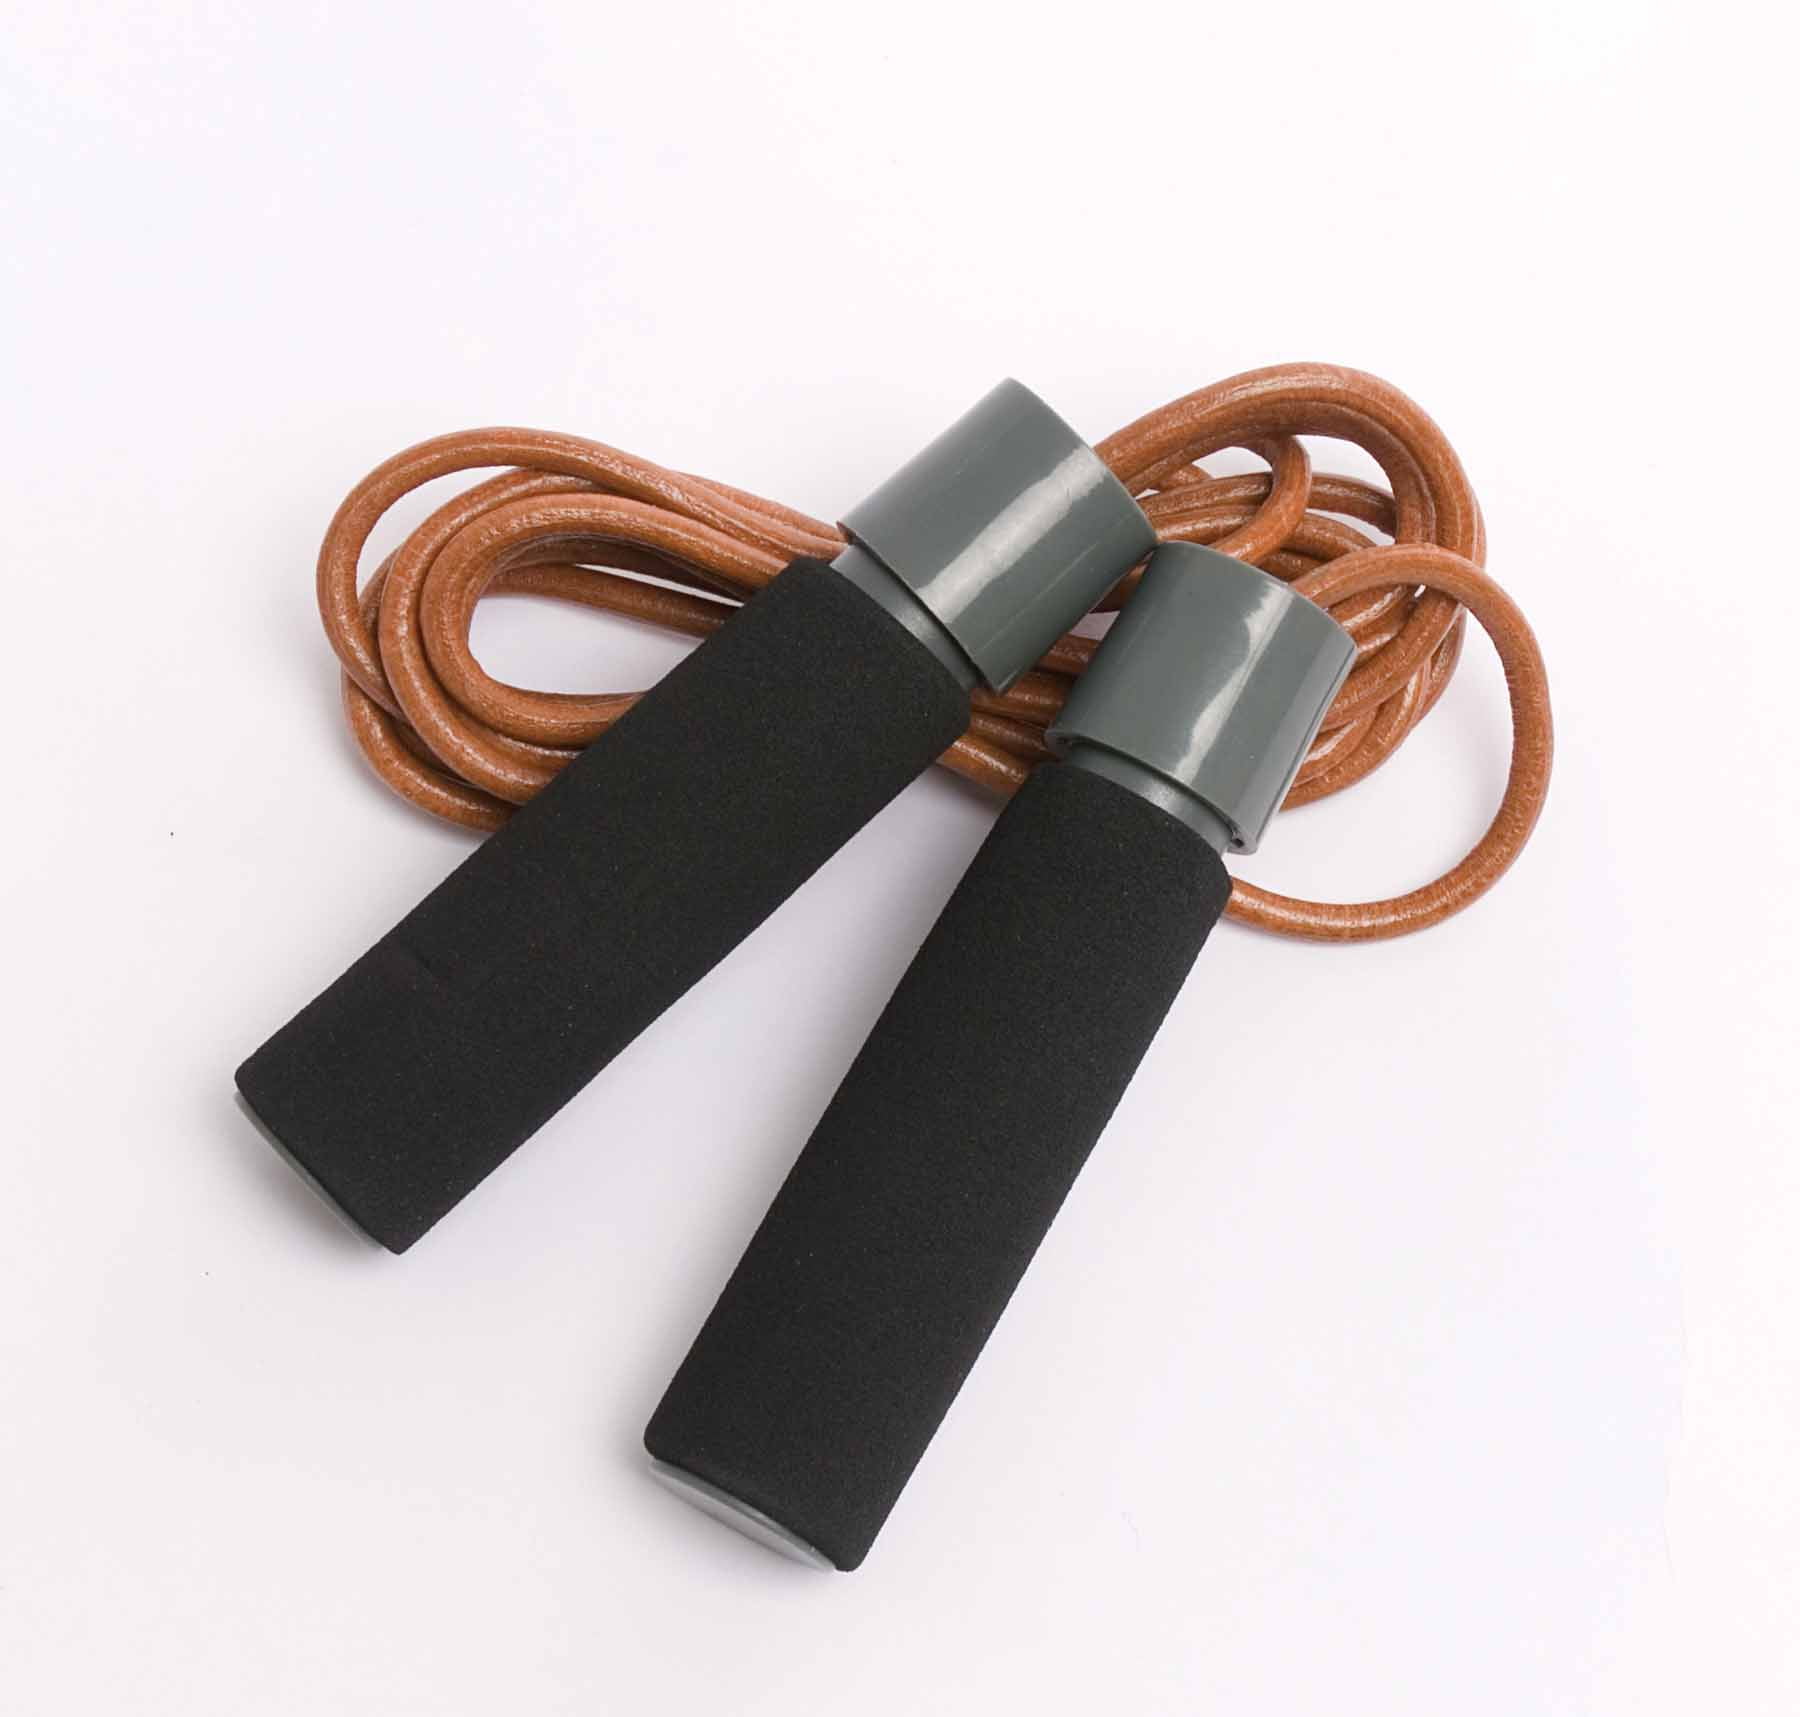 Details about   Training Fitness Exercise Adjustable Soft Beaded Jump Ropes Workout Jump Ropes 